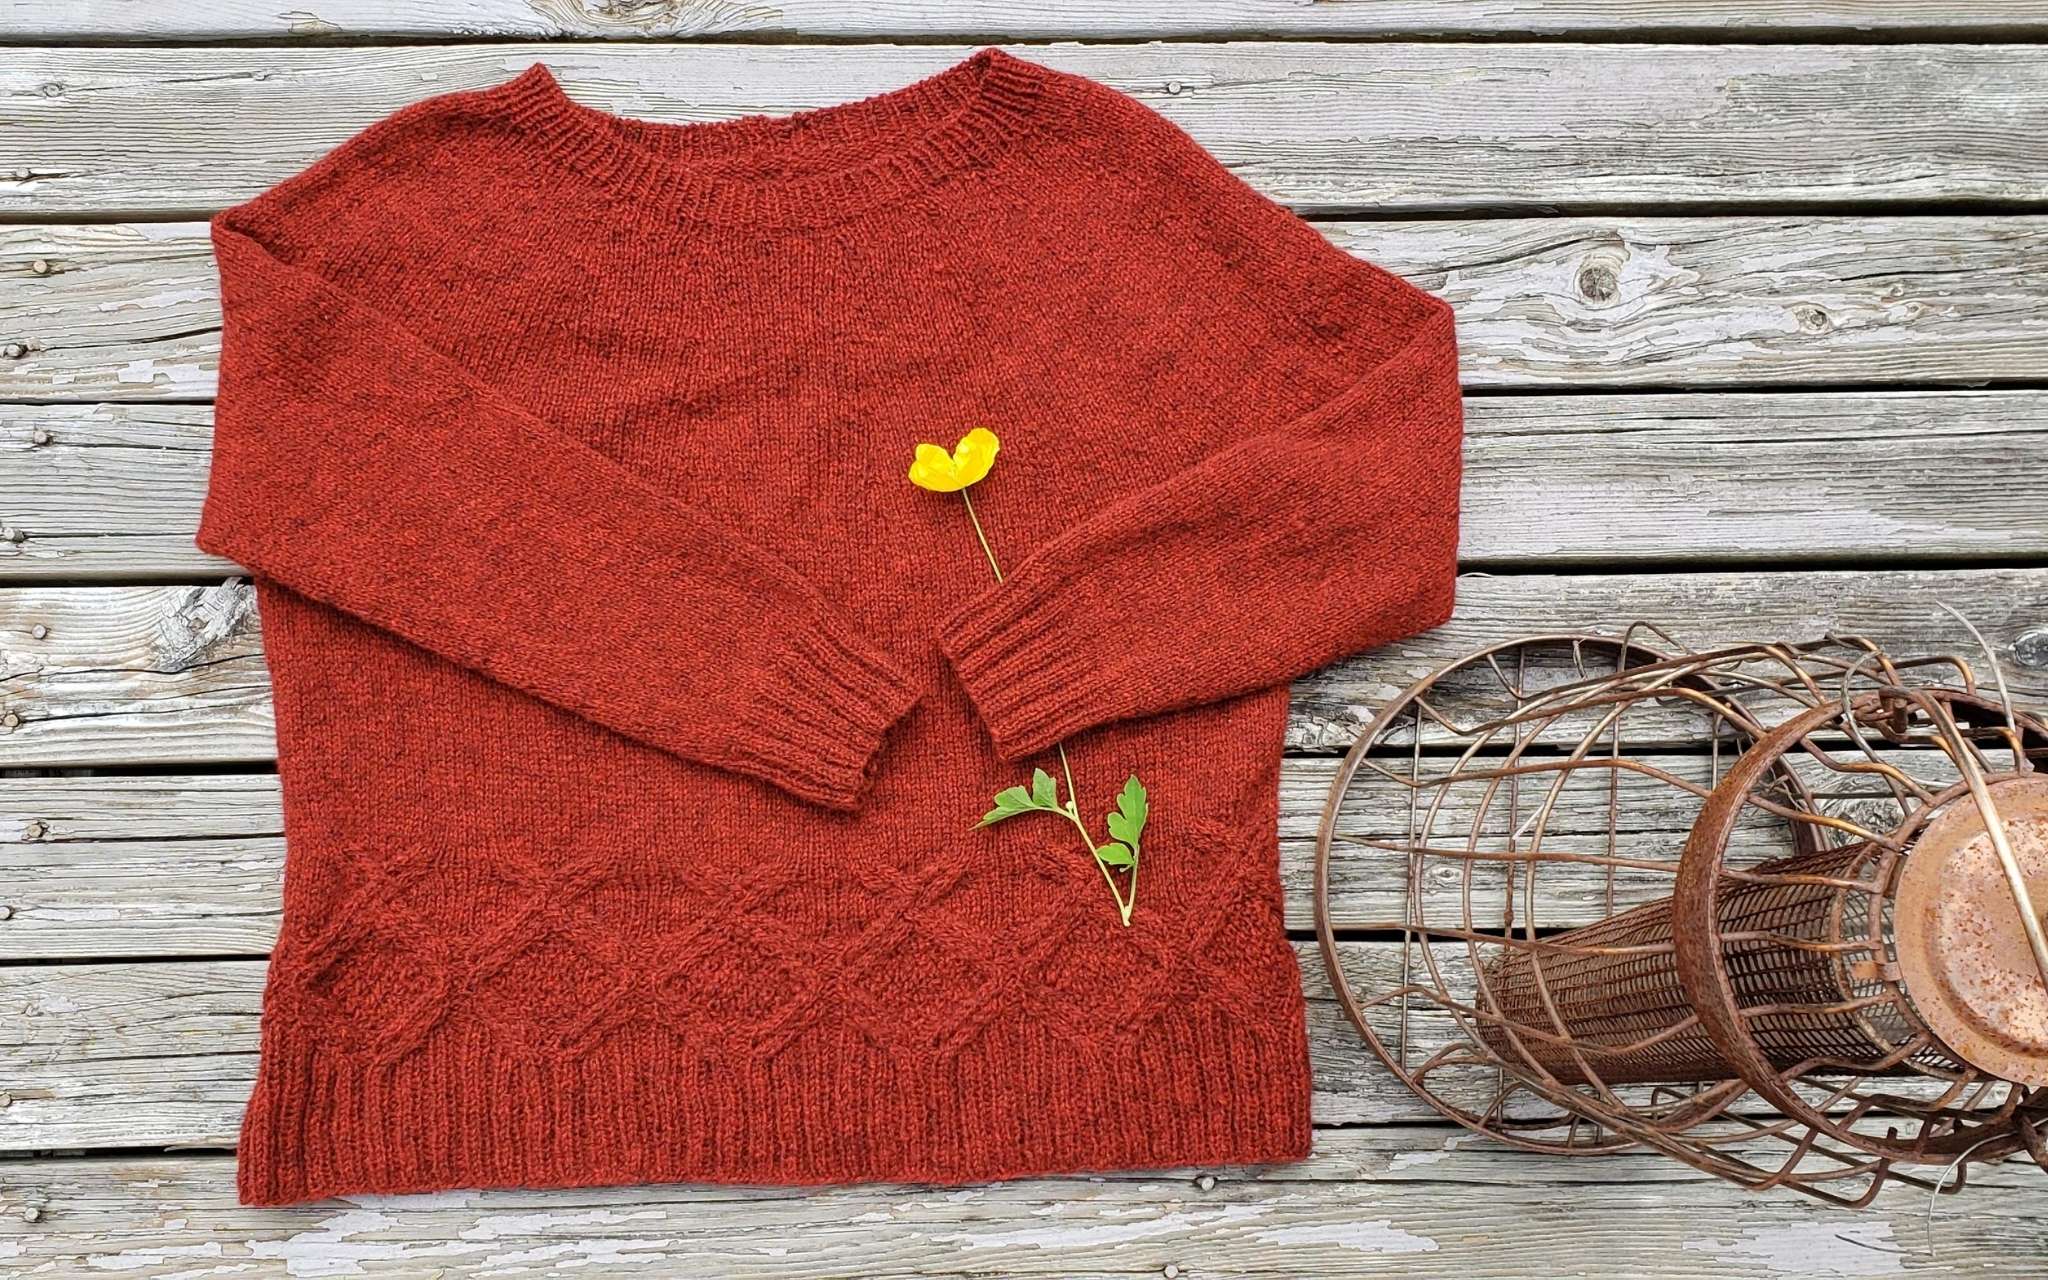 rich orange sweater with cabled hem, laying flat with a yellow flower